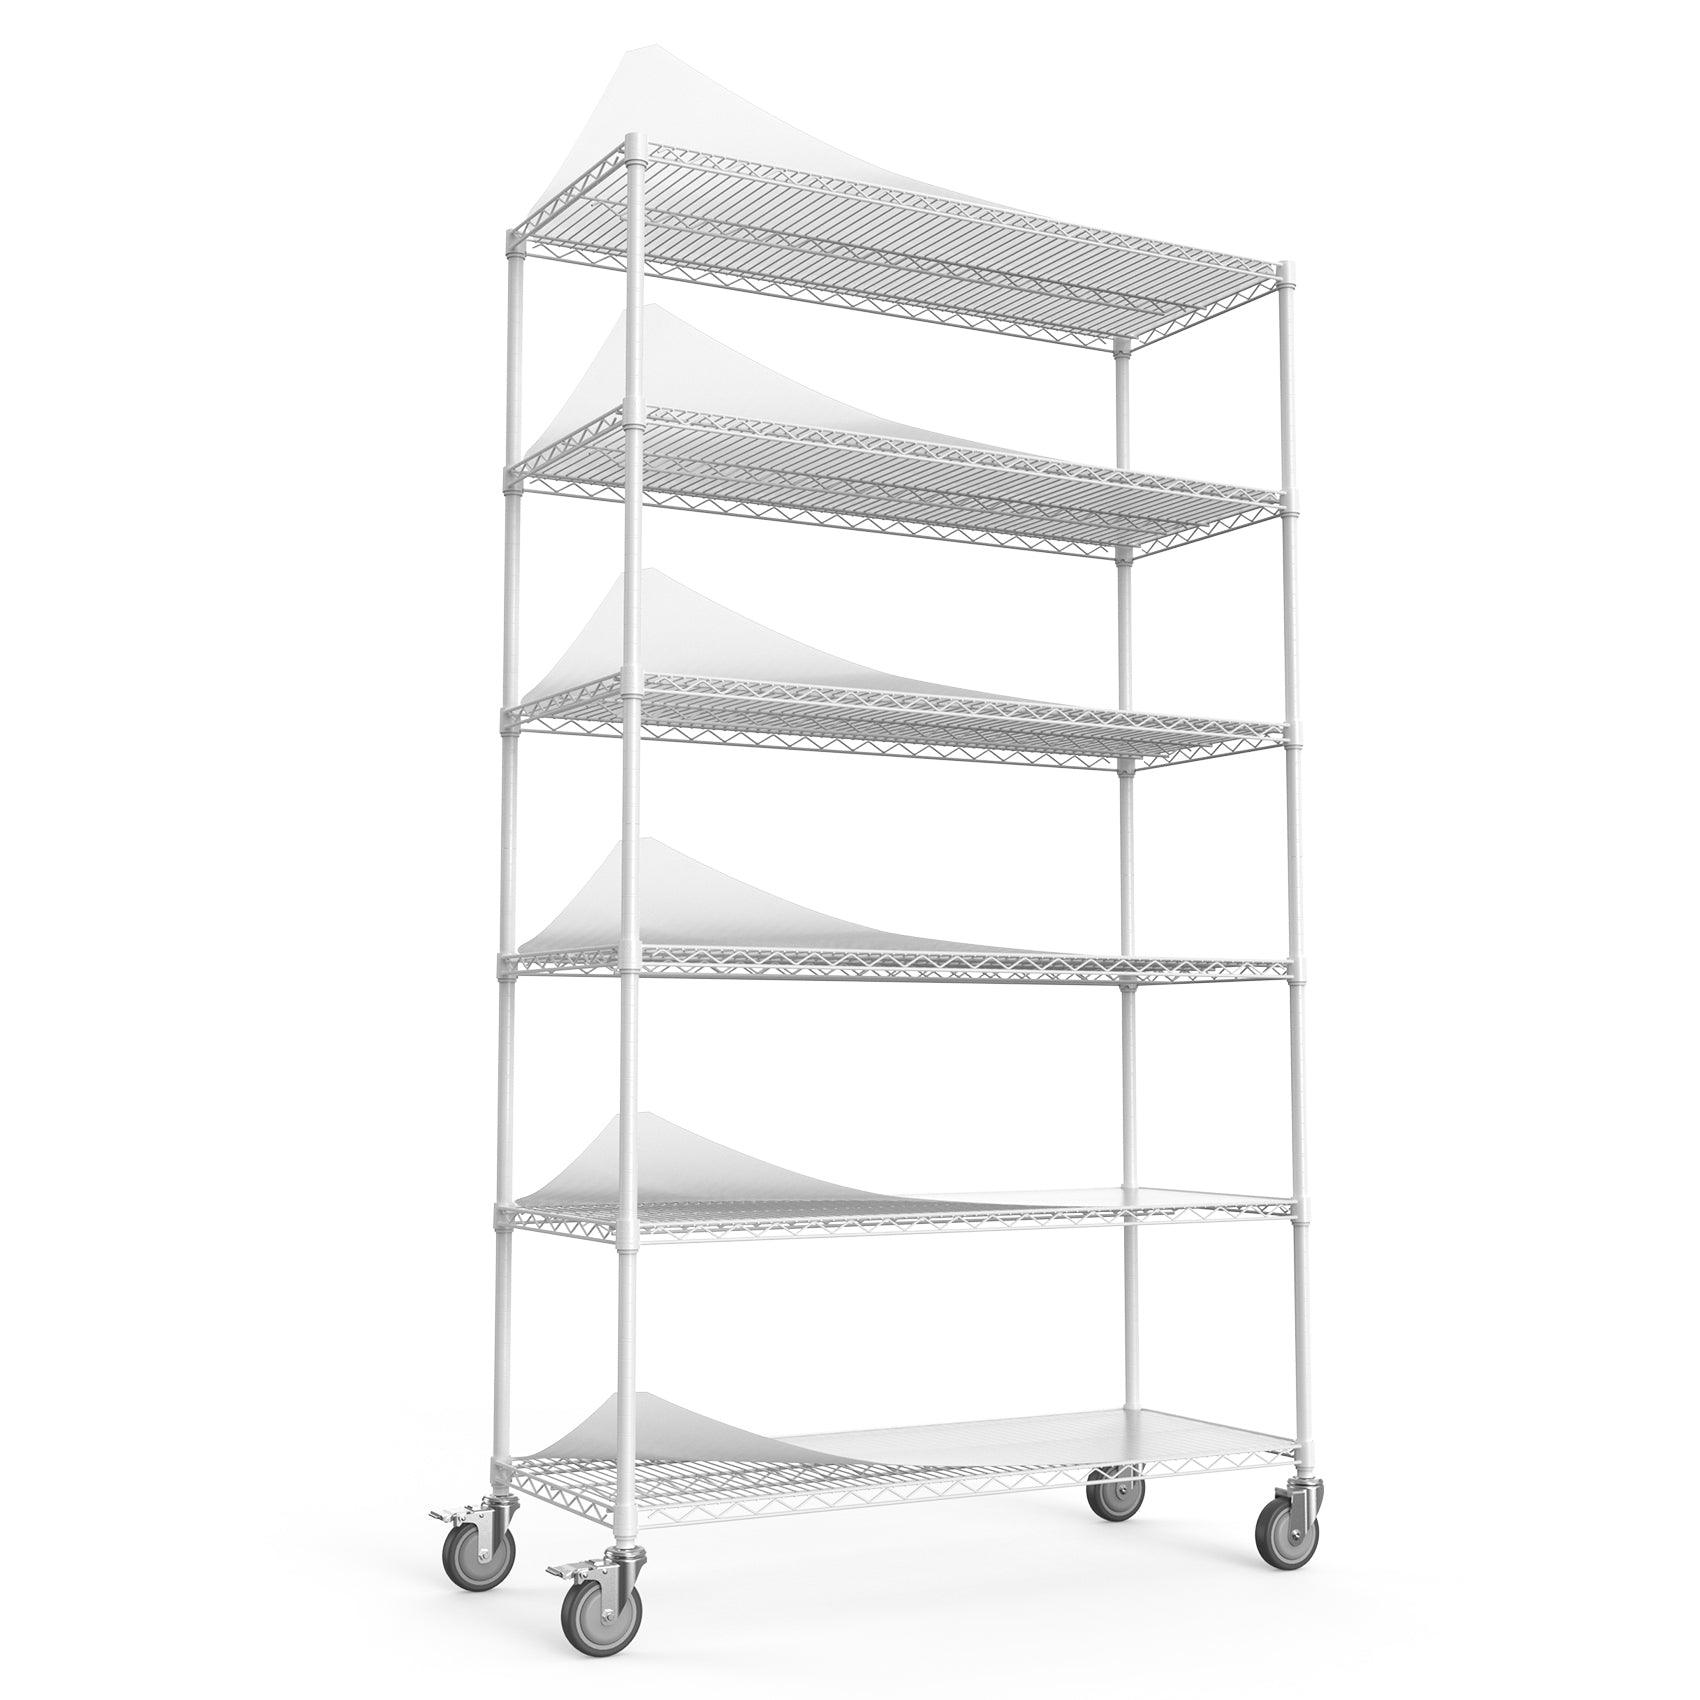 6 Tier Wire Shelving Unit, 6000 LBS NSF Height Adjustable Metal Garage Storage Shelves with Wheels, Heavy Duty Storage Wire Rack Metal Shelves - White - 204882 LamCham